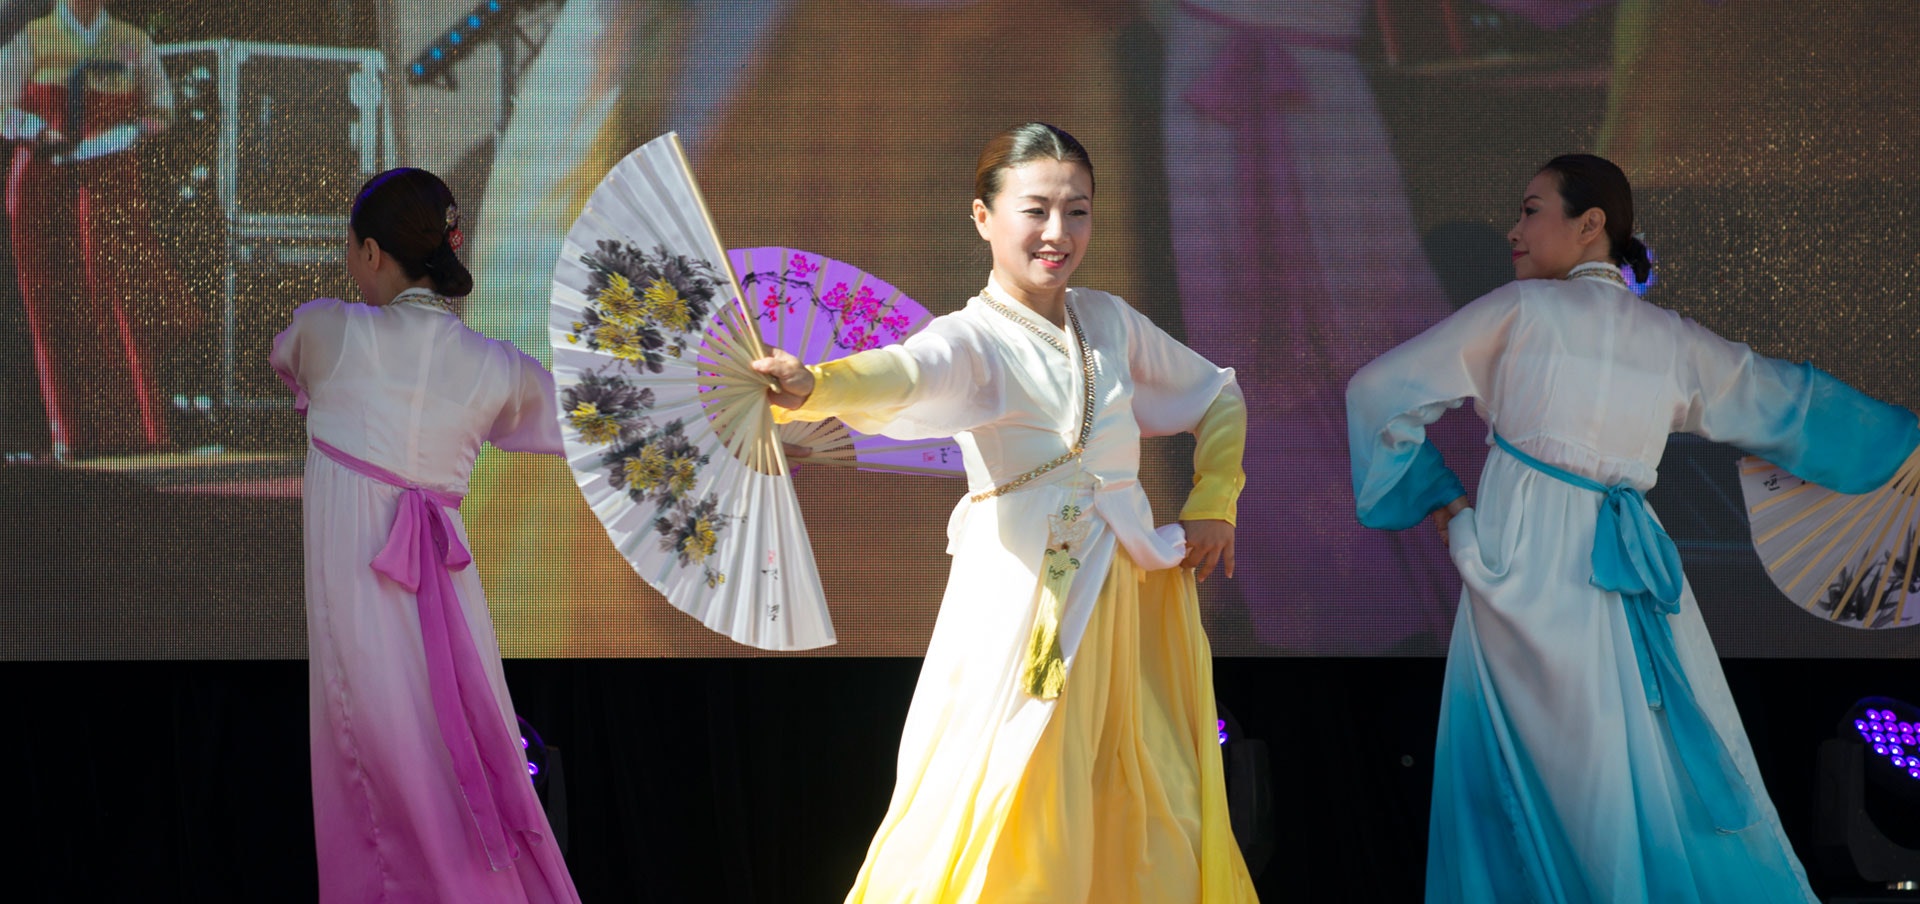 Traditional Korean dancers holding hand fans while performing on stage at Fed Square